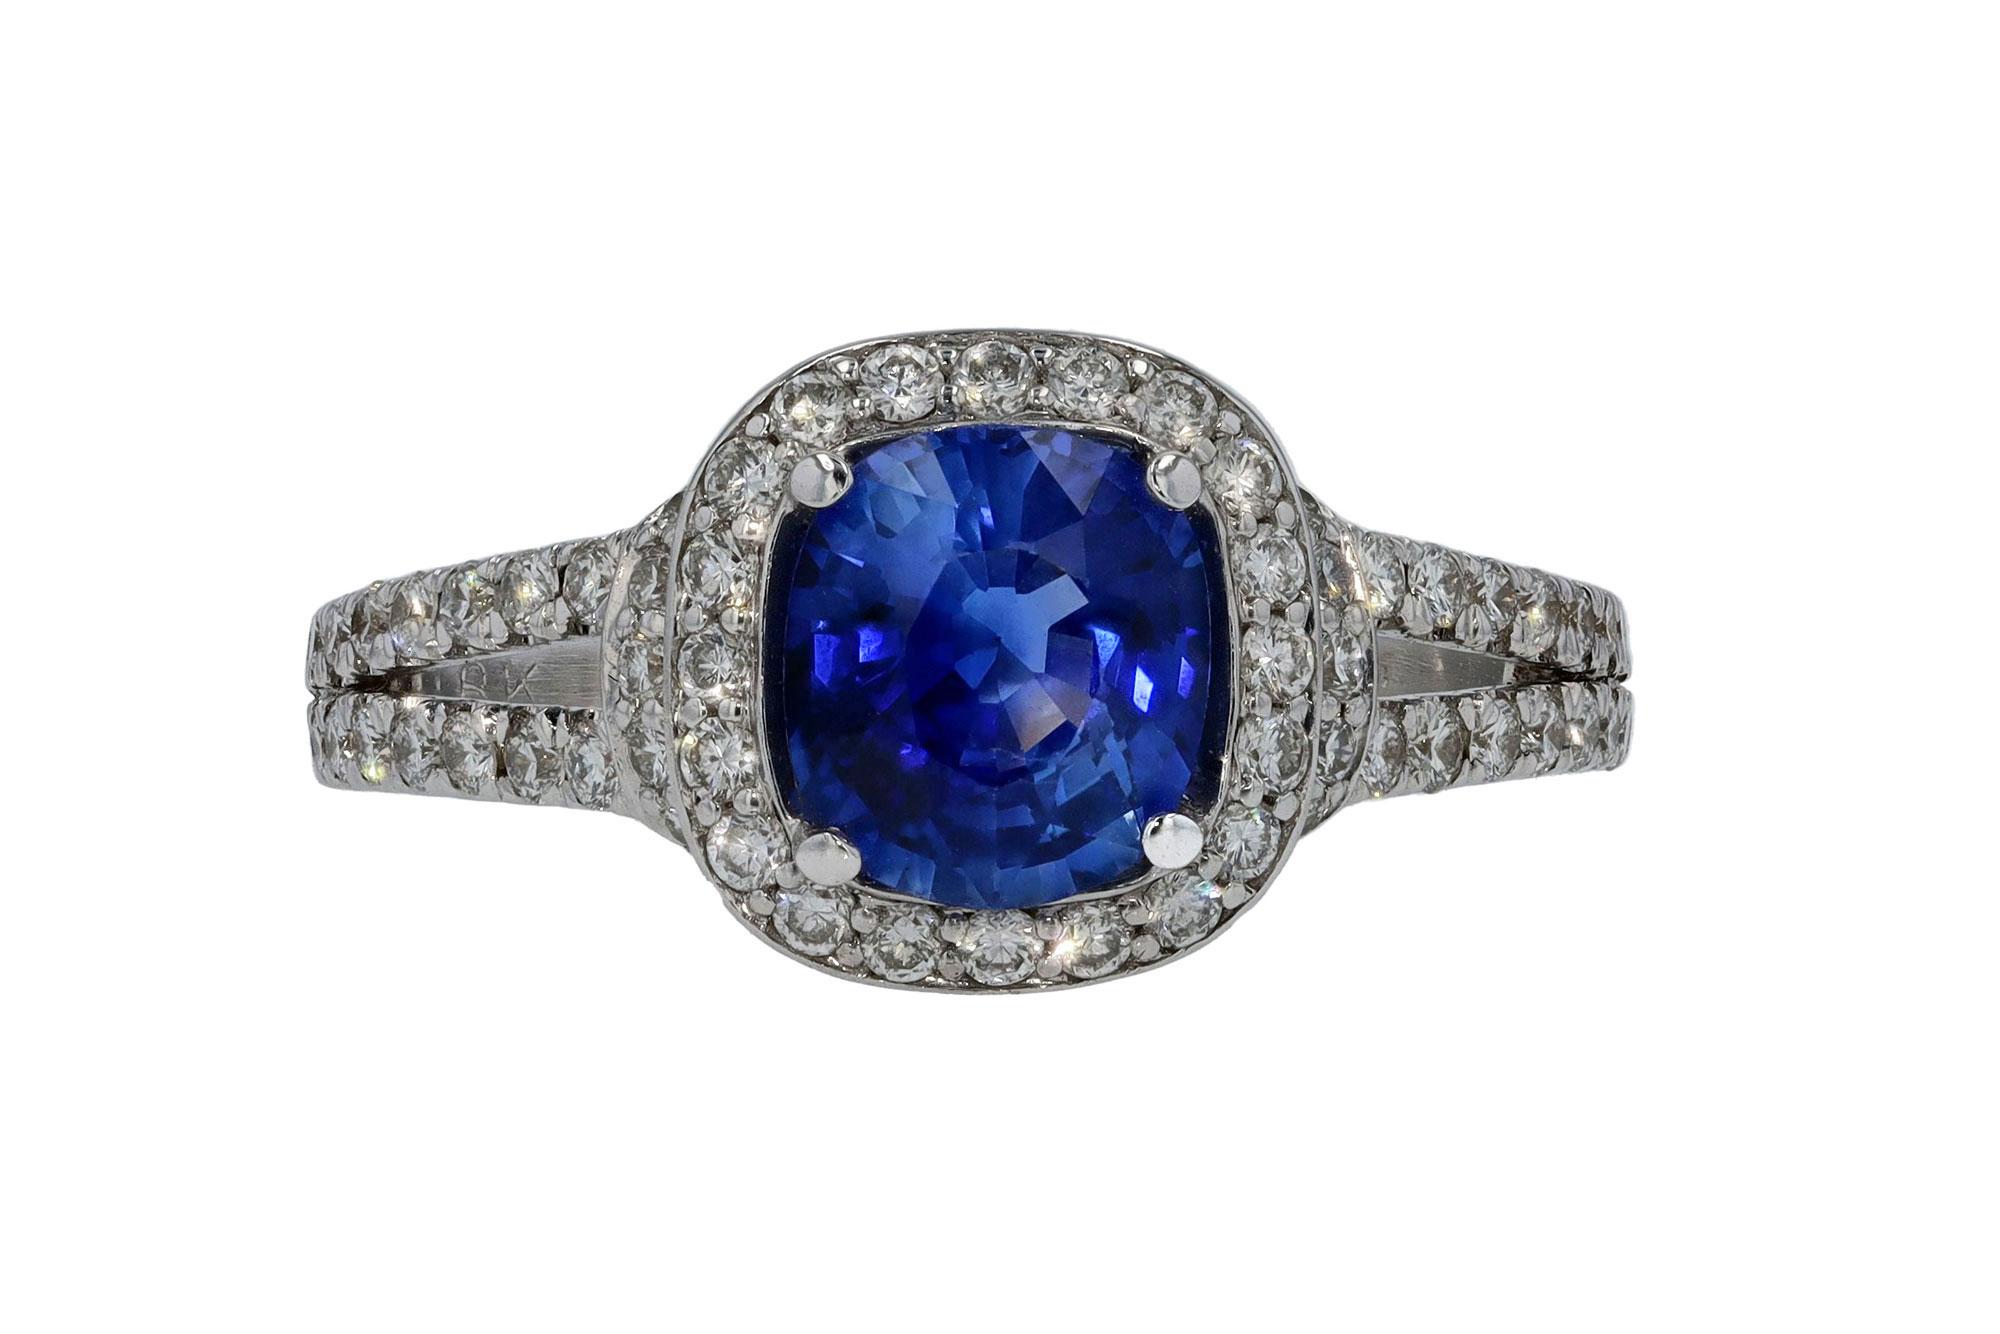 A contemporary sapphire and diamond engagement ring that commands attention. A 1.62 carat cushion cut sapphire is centered displaying a vibrant and deep blue. Accented by over 1 carat of shimmering, icy white diamonds forming the halo and open 